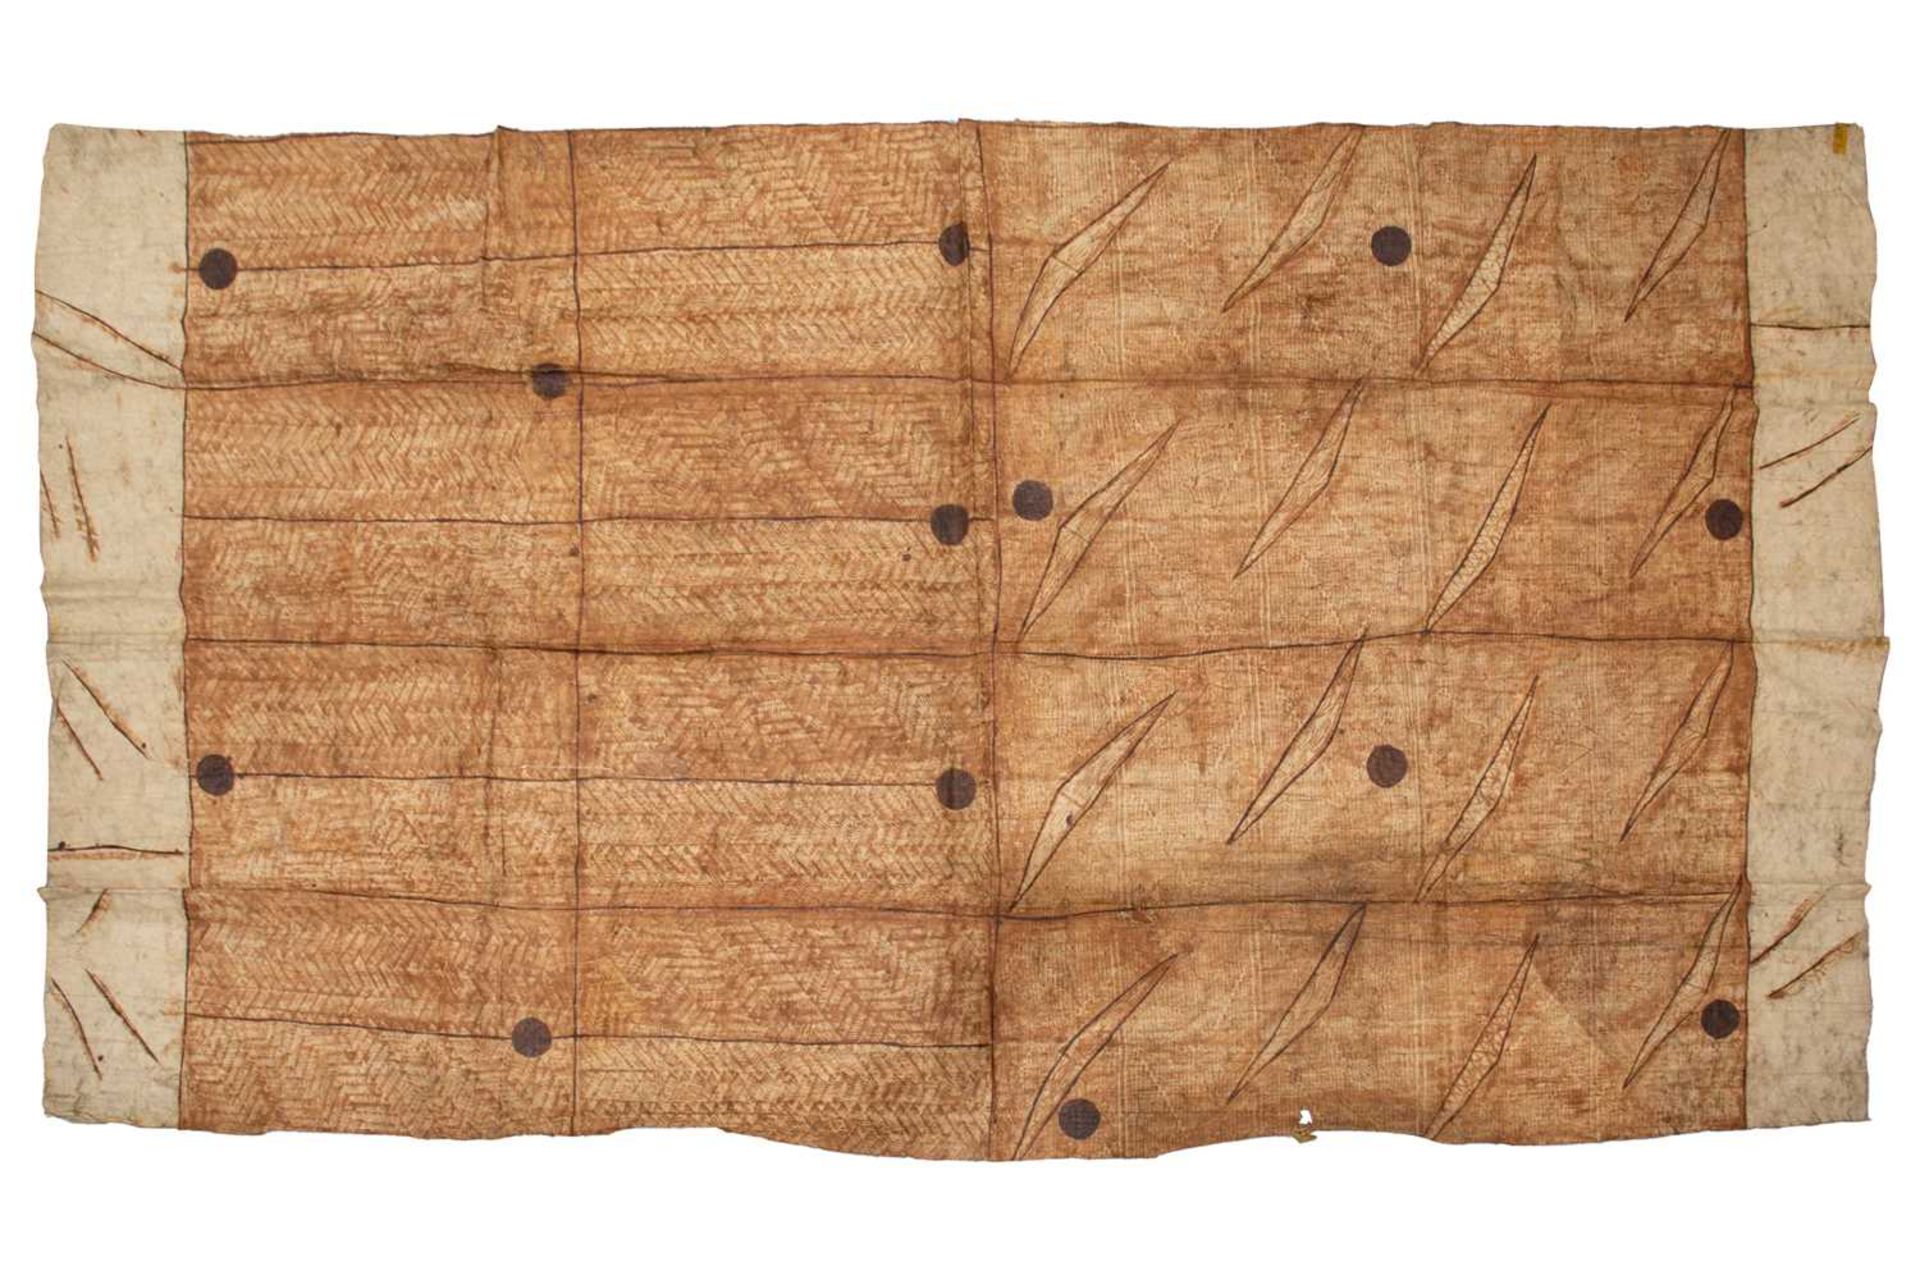 Of historical Fijian interest; a Fijian bark cloth blanket (?), late 19th century painted with earth